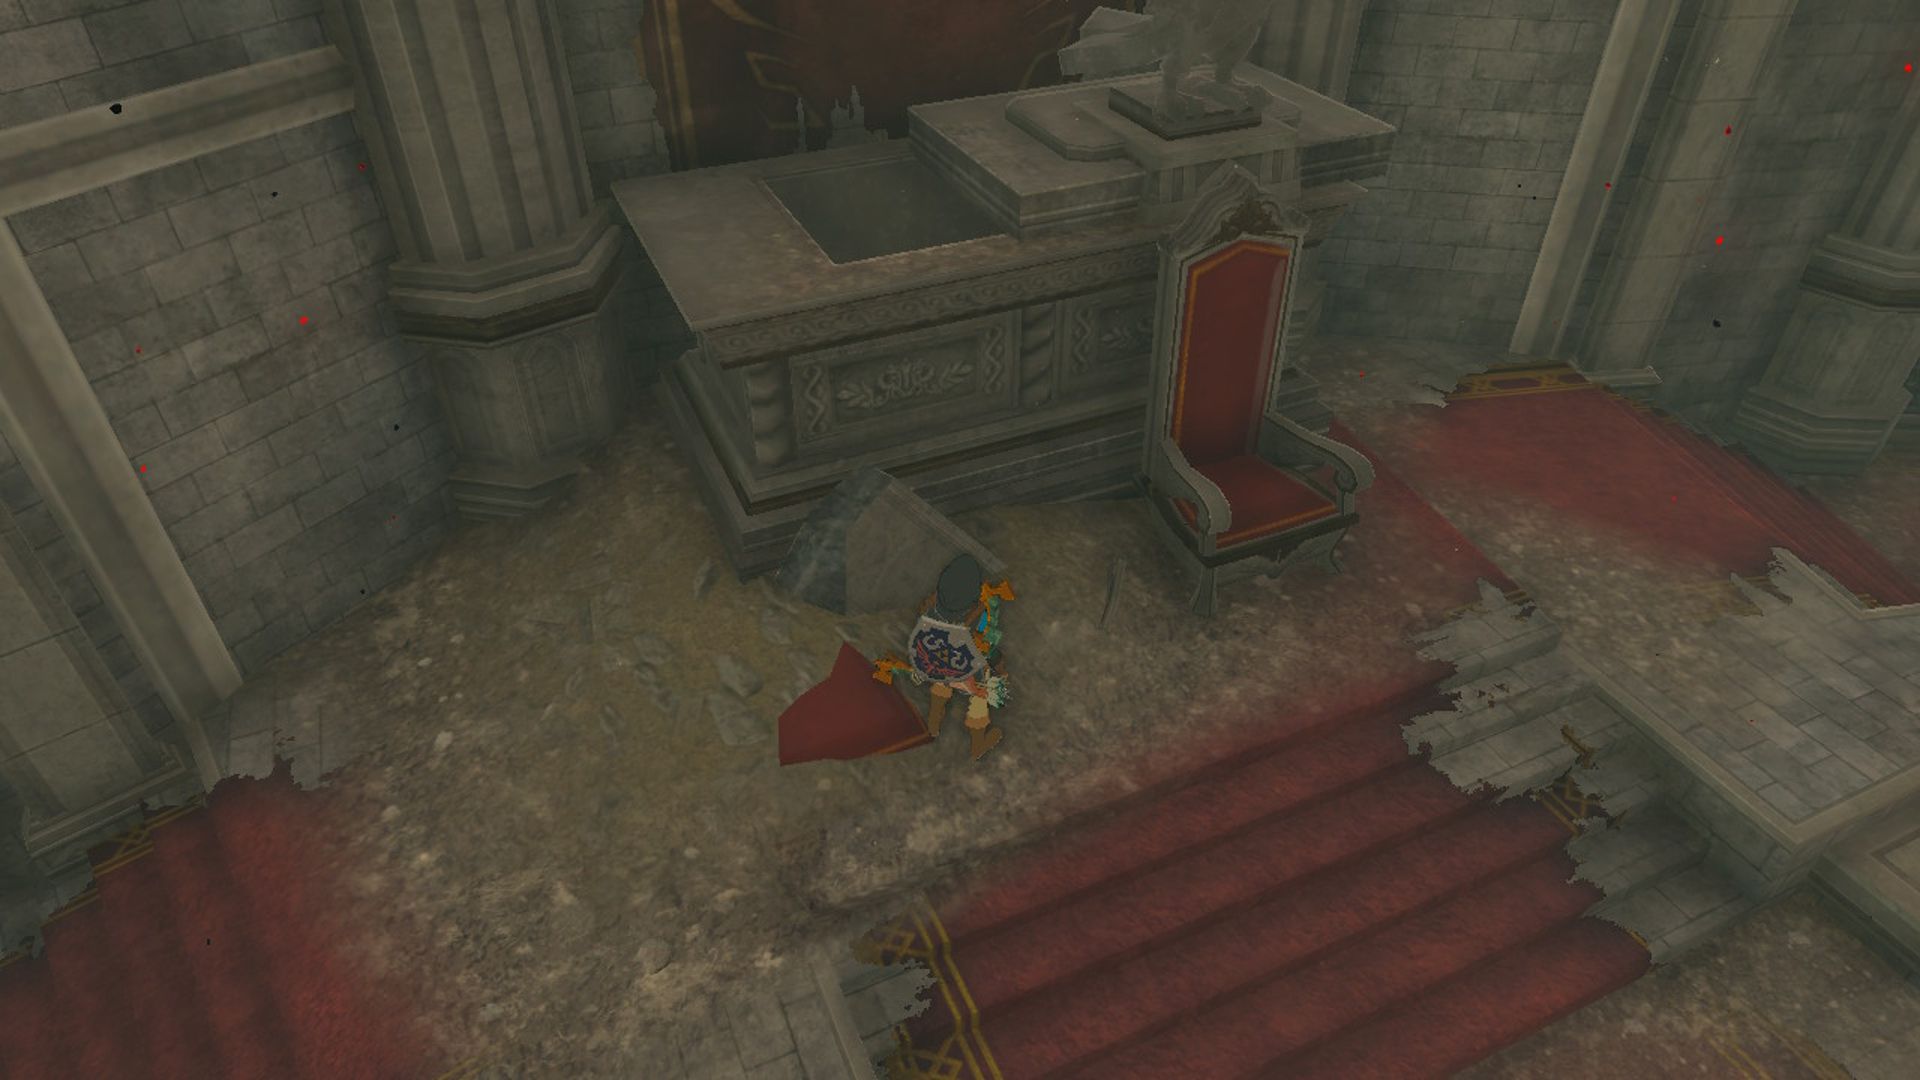 The Legend Of Zelda Tears Of The Kingdom Link Looking At Champion's Leather Secret Compartment Behind Throne In Hyrule Castle Sanctum